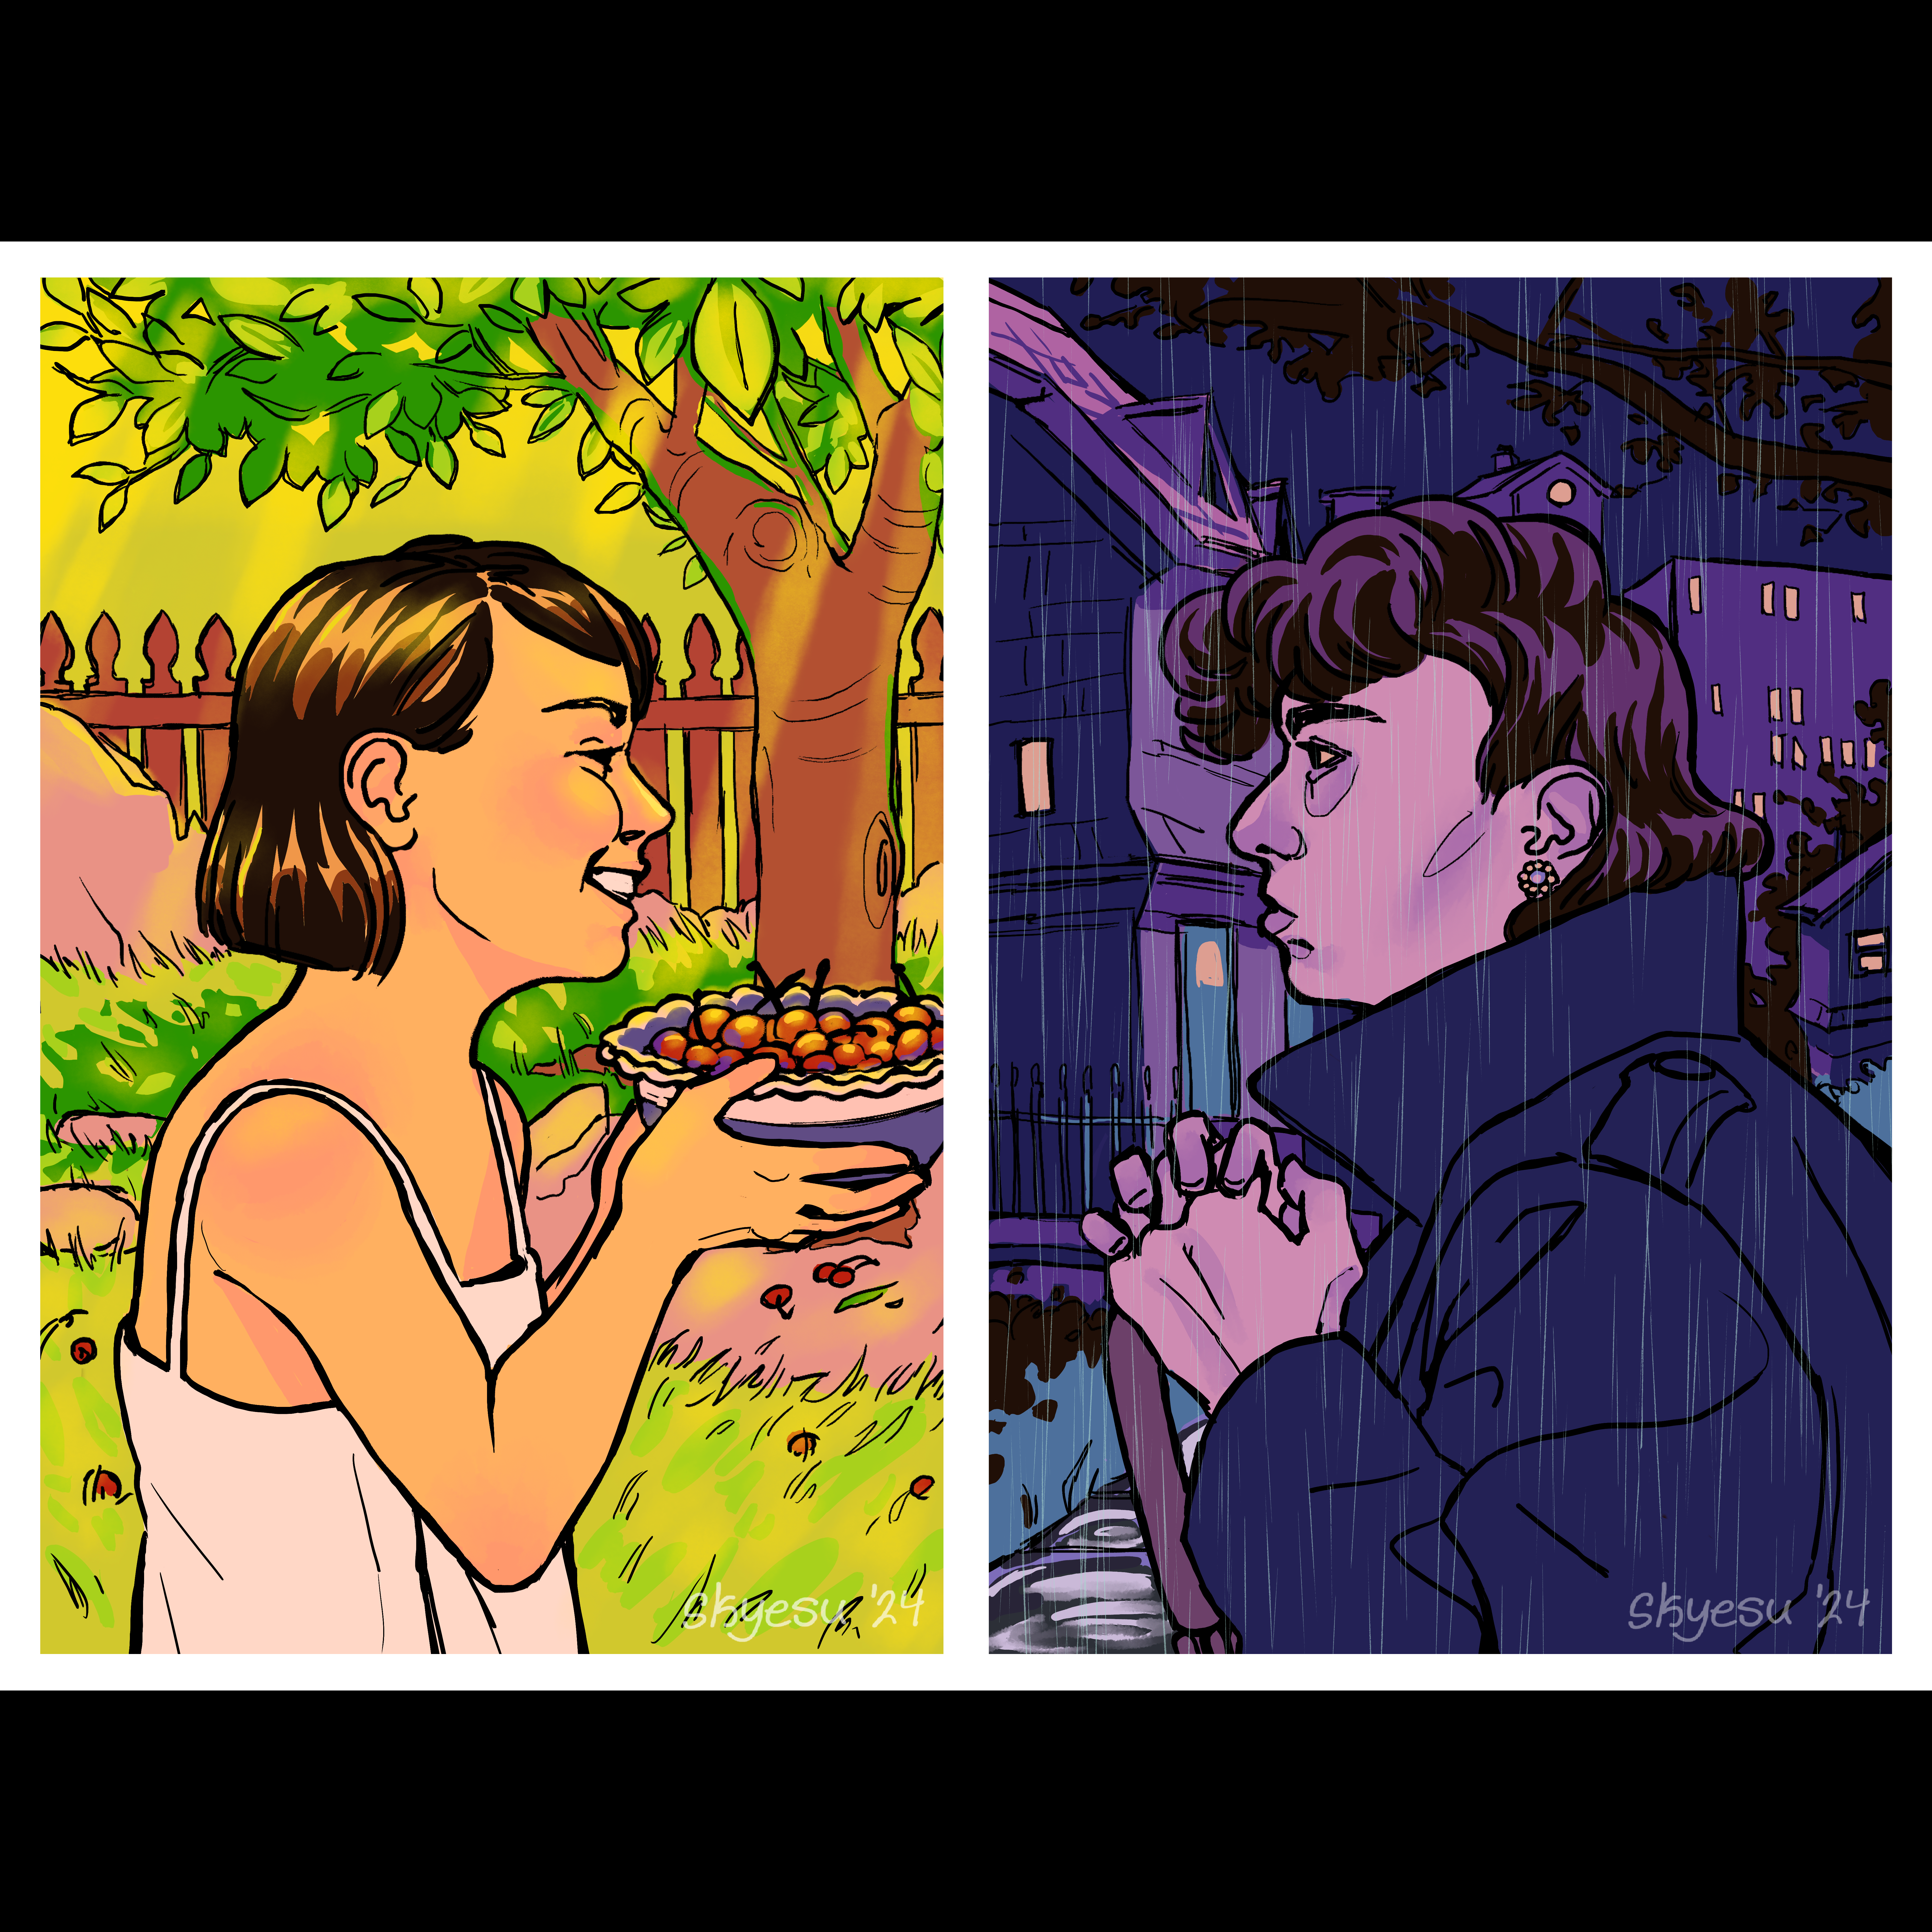 digital diptych with a white border surrounding the halves. on the left is a sunny scene of a child happily holding up a bowl of cherries; on the right is an older person in a trench coat holding the handle of an umbrella in a rainy city street